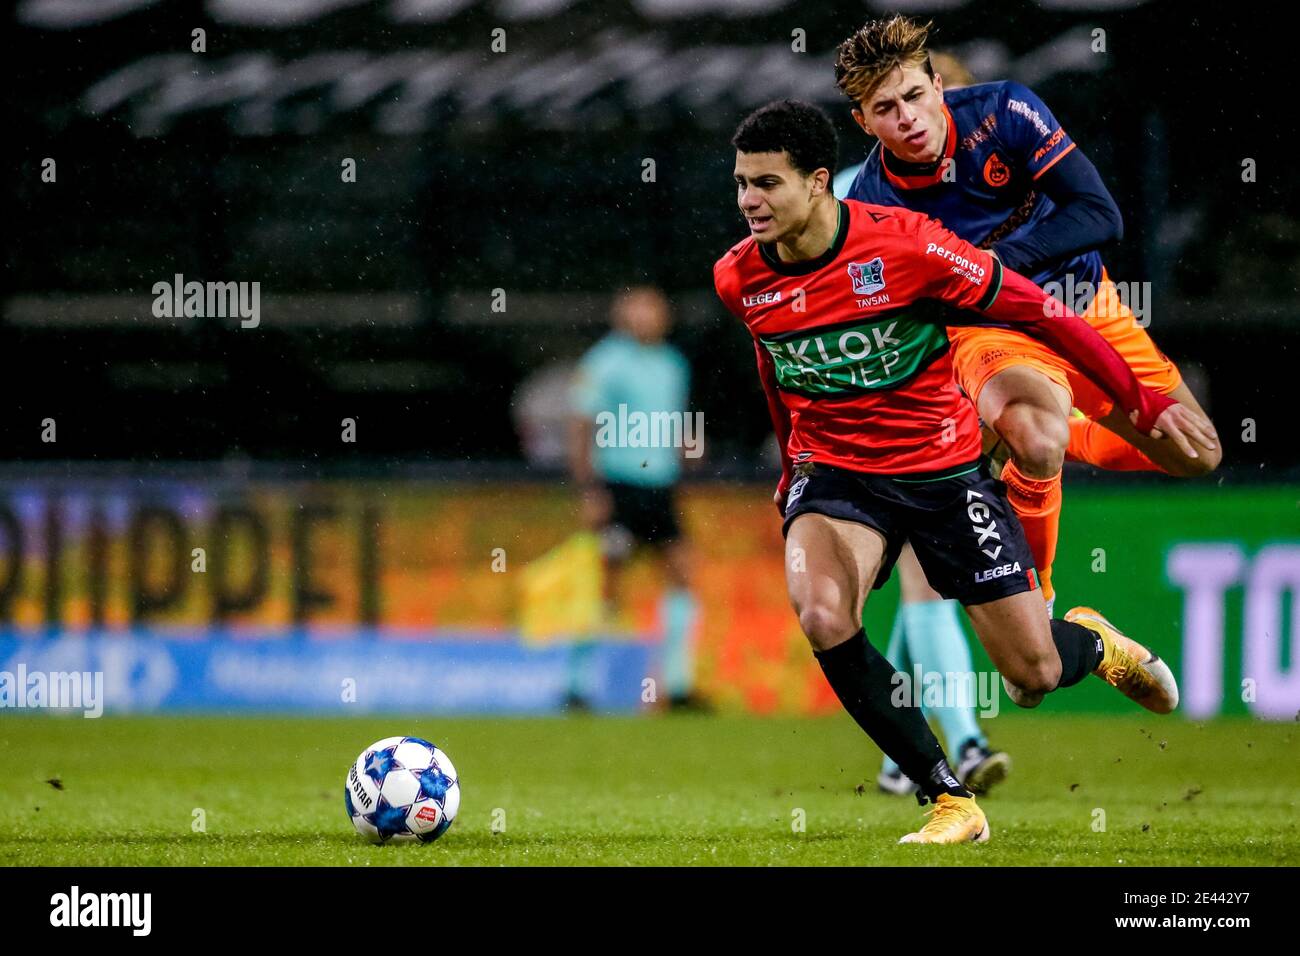 NIJMEGEN, NETHERLANDS - JANUARY 21: (L-R): Elayis Tavsan of NEC, Lazaros Rota of Fortuna Sittard during the Dutch KNVB Cup match between NEC and Fortu Stock Photo